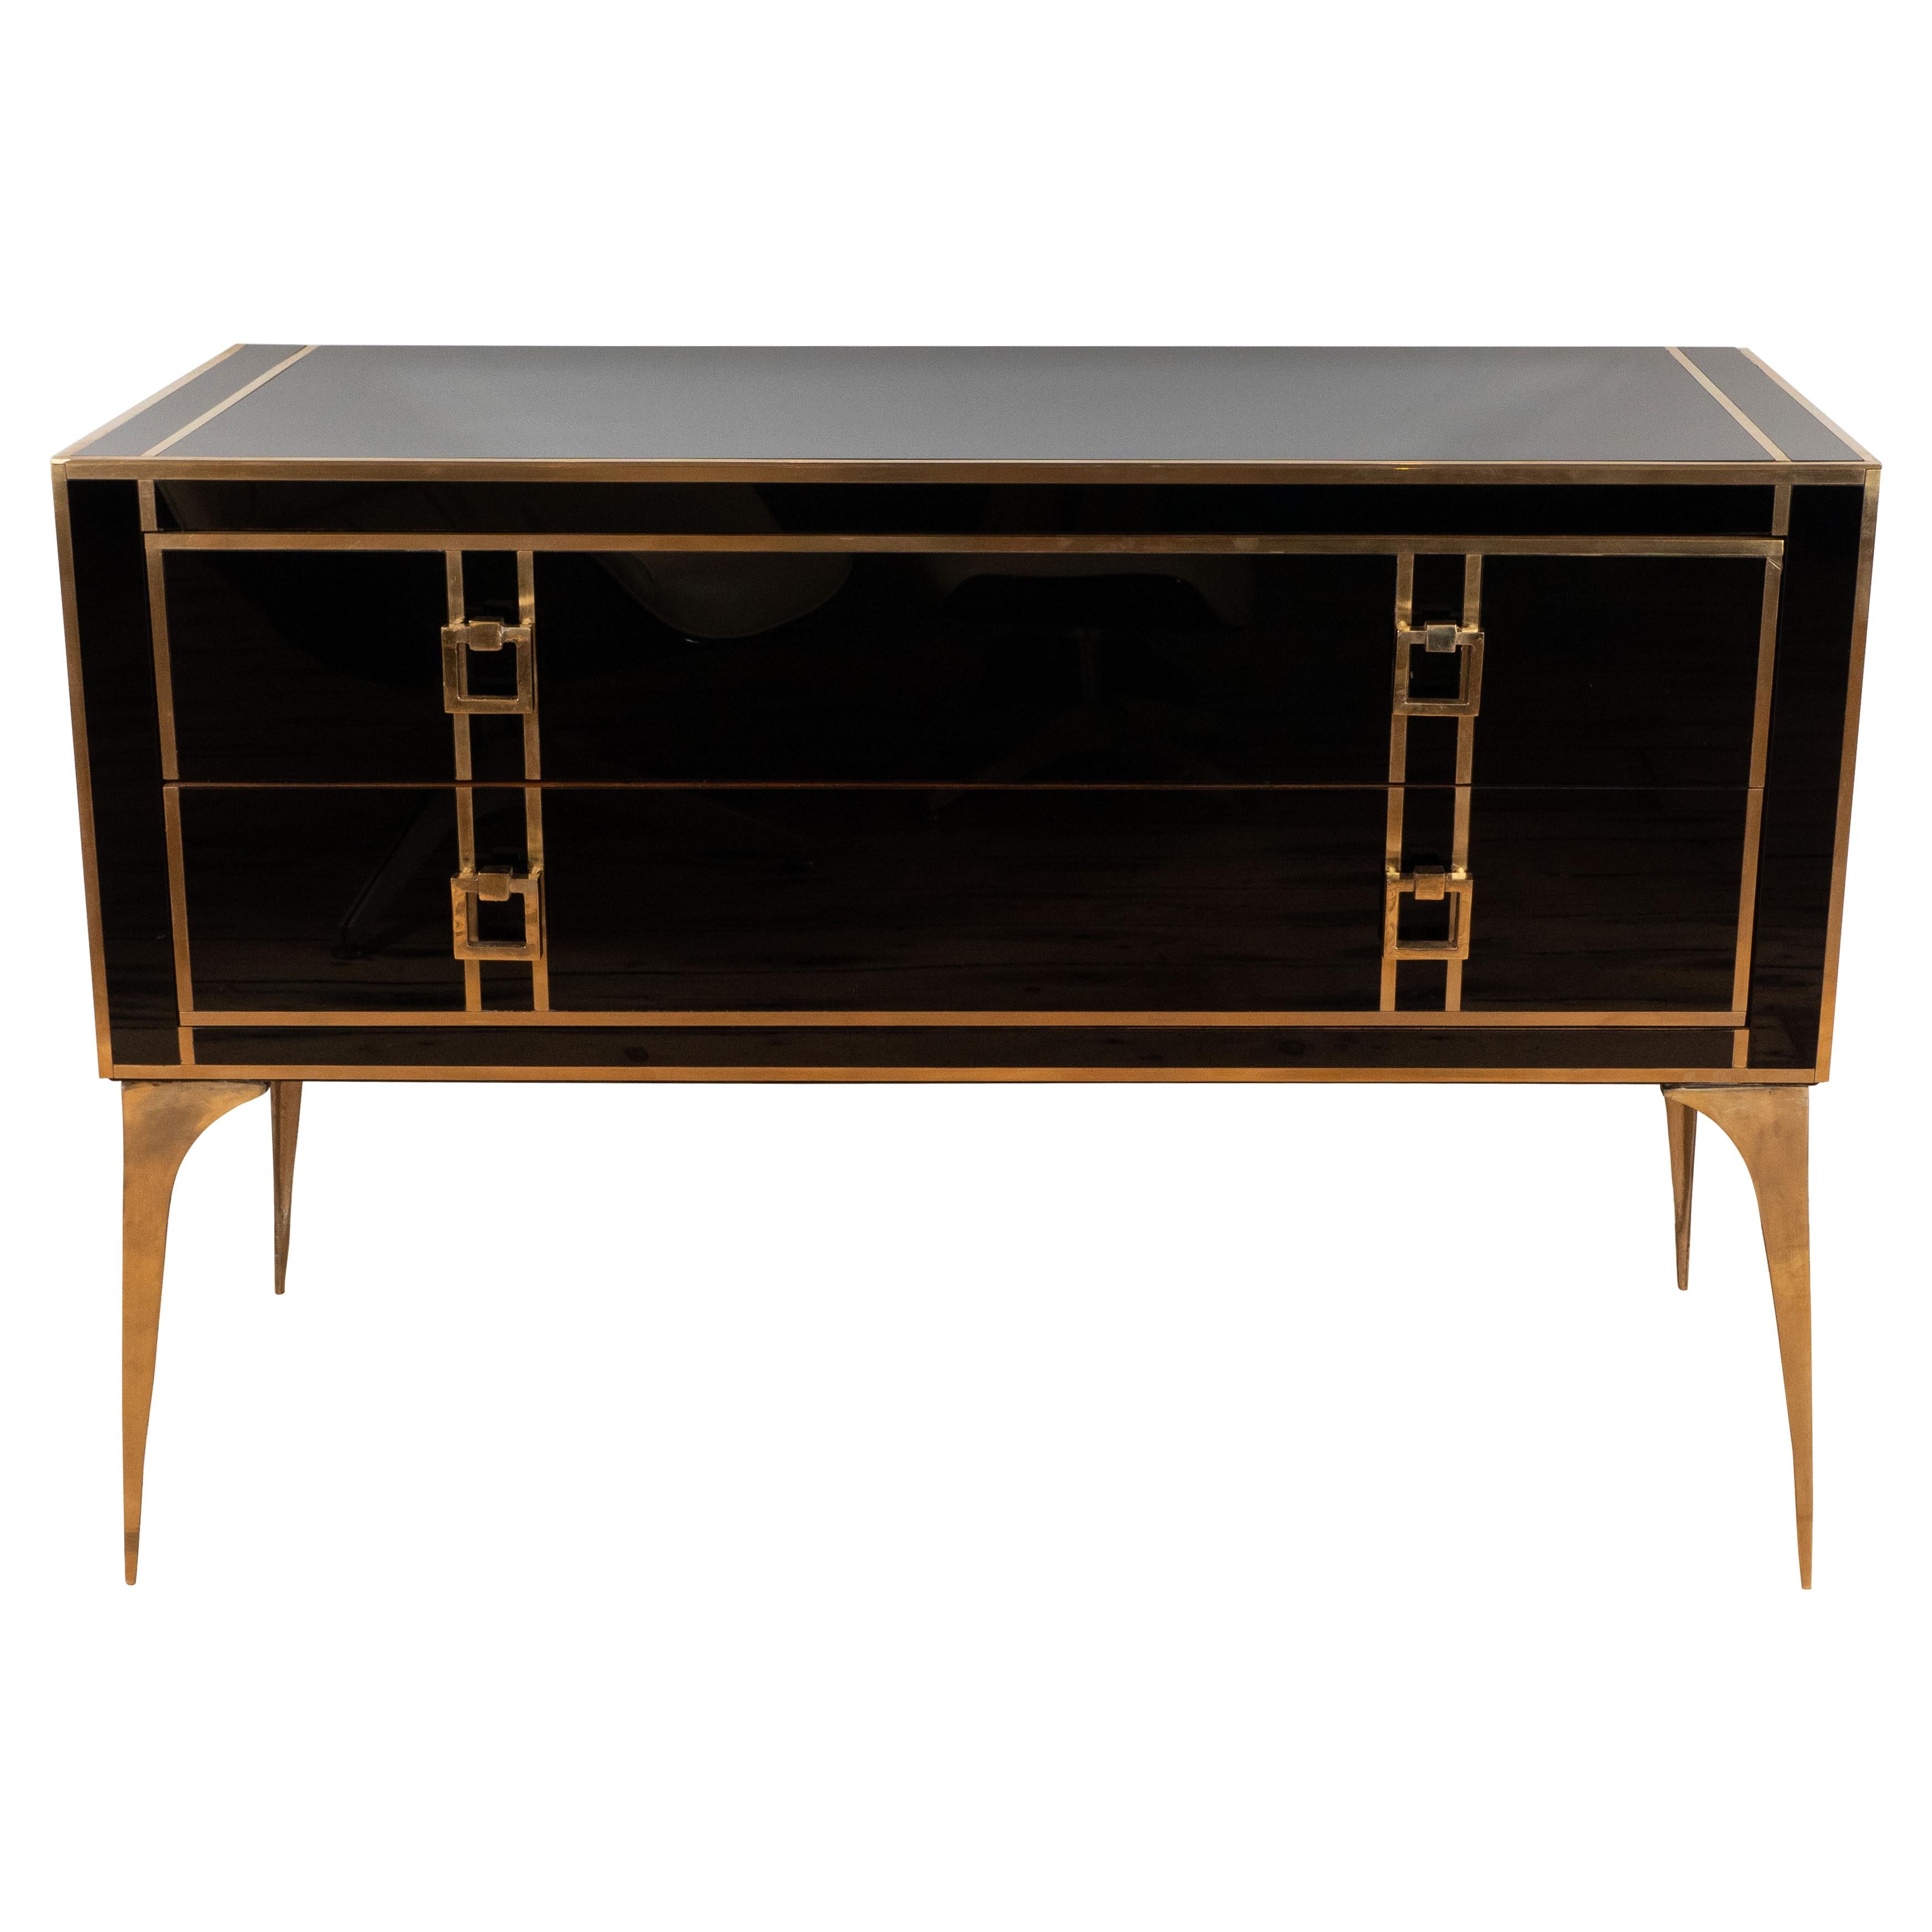 One of a kind pair of black glass and brass chest of drawers or commodes handmade in Venice, Italy by a master artisan and artist. Wooden frame is covered in handcrafted Black tinted glass panels with brass inlays. Elegant solid brass square pulls